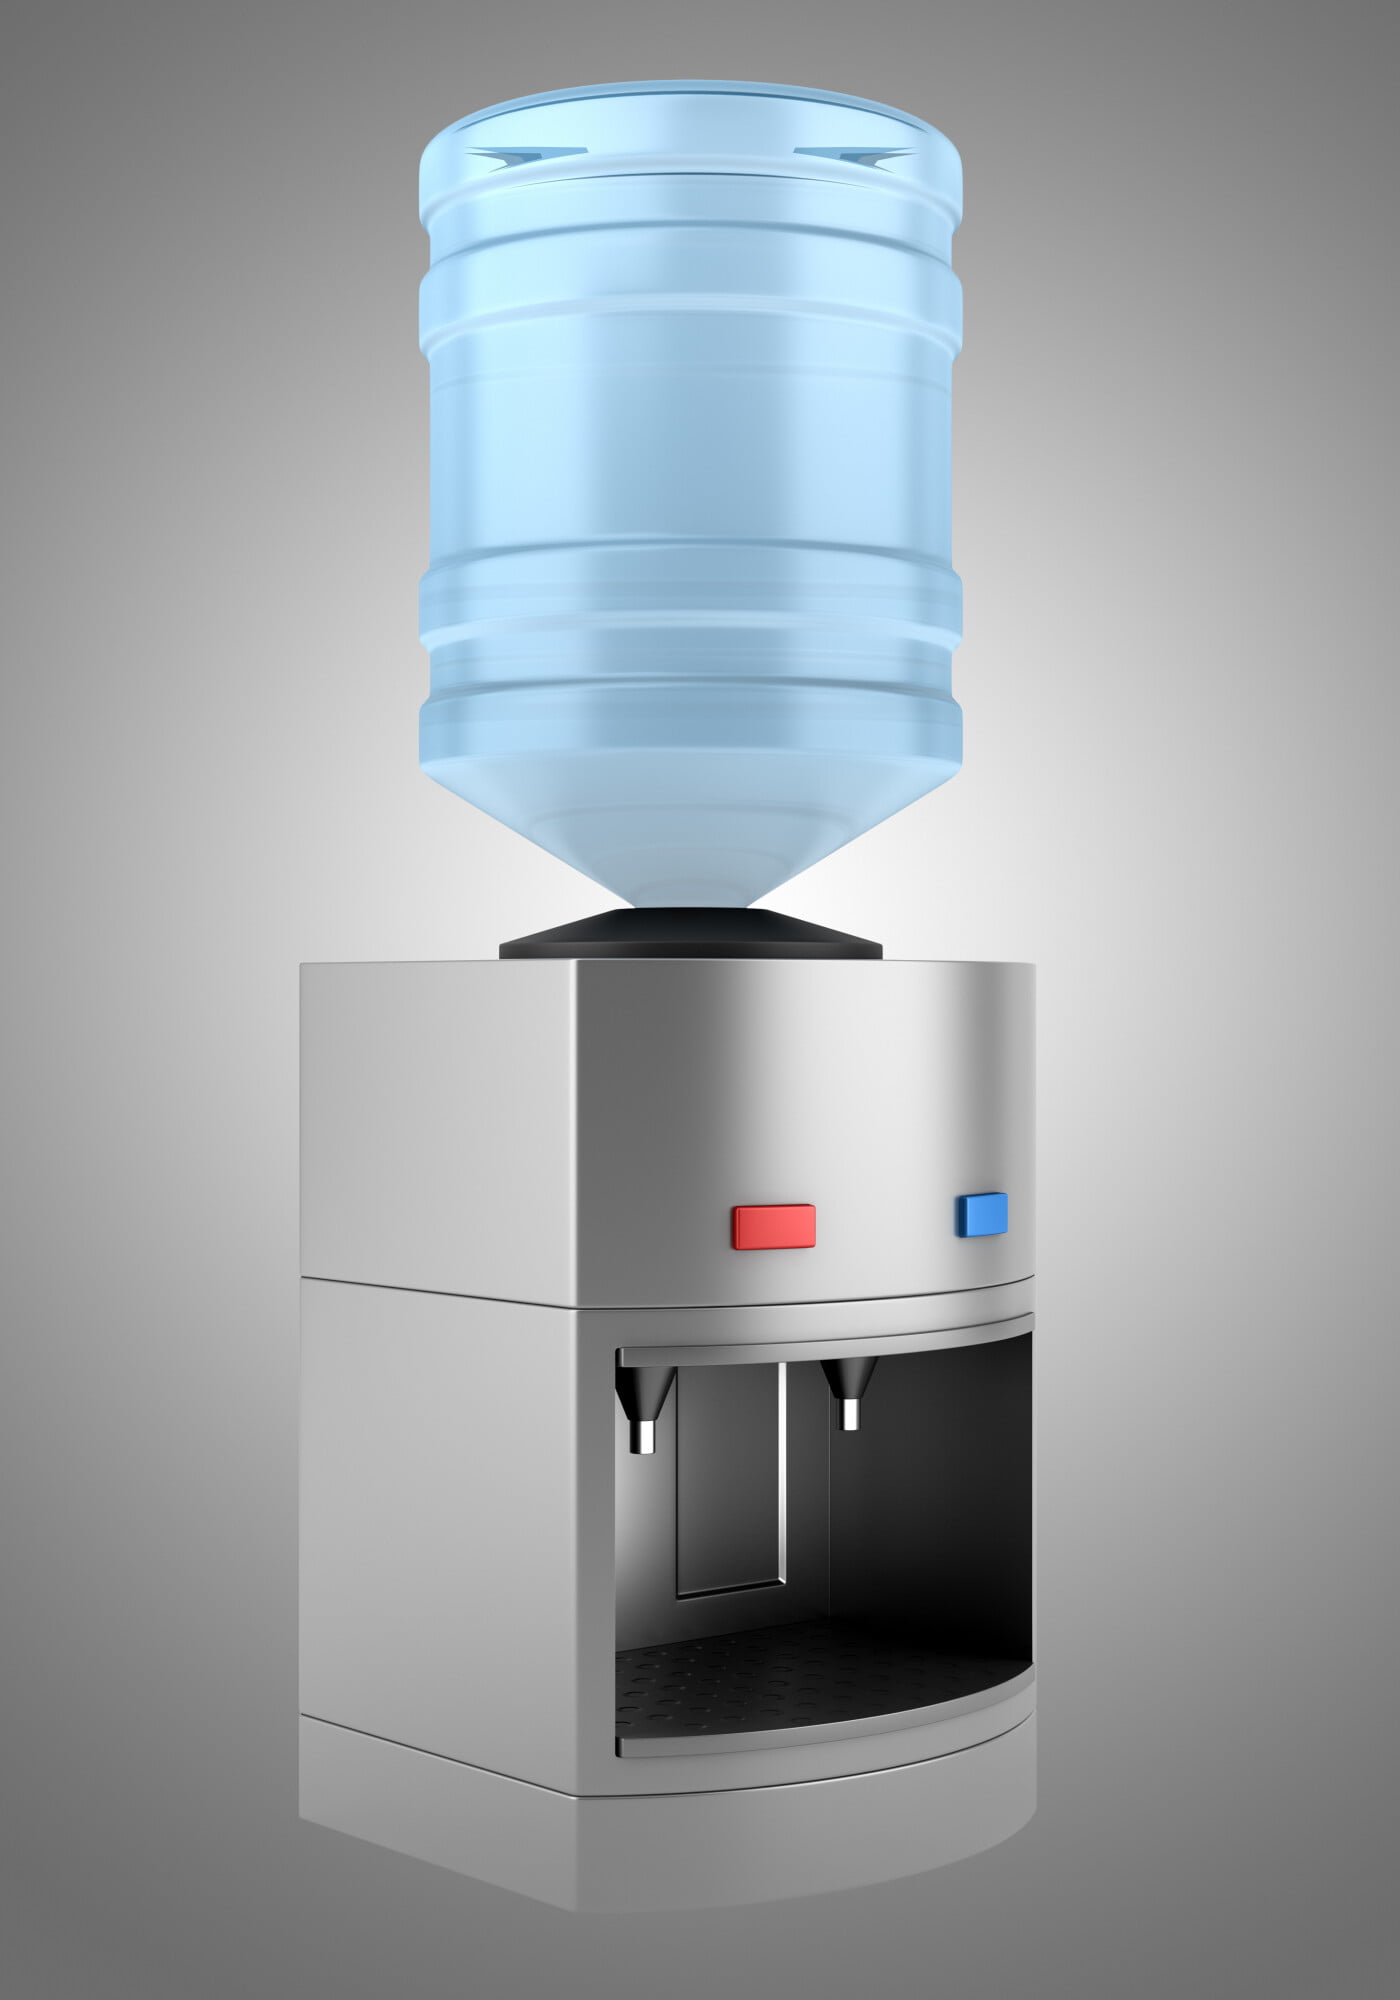 Are you wondering if you should add a hot water dispenser to your home? Click here for five awesome benefits of having a hot water dispenser.